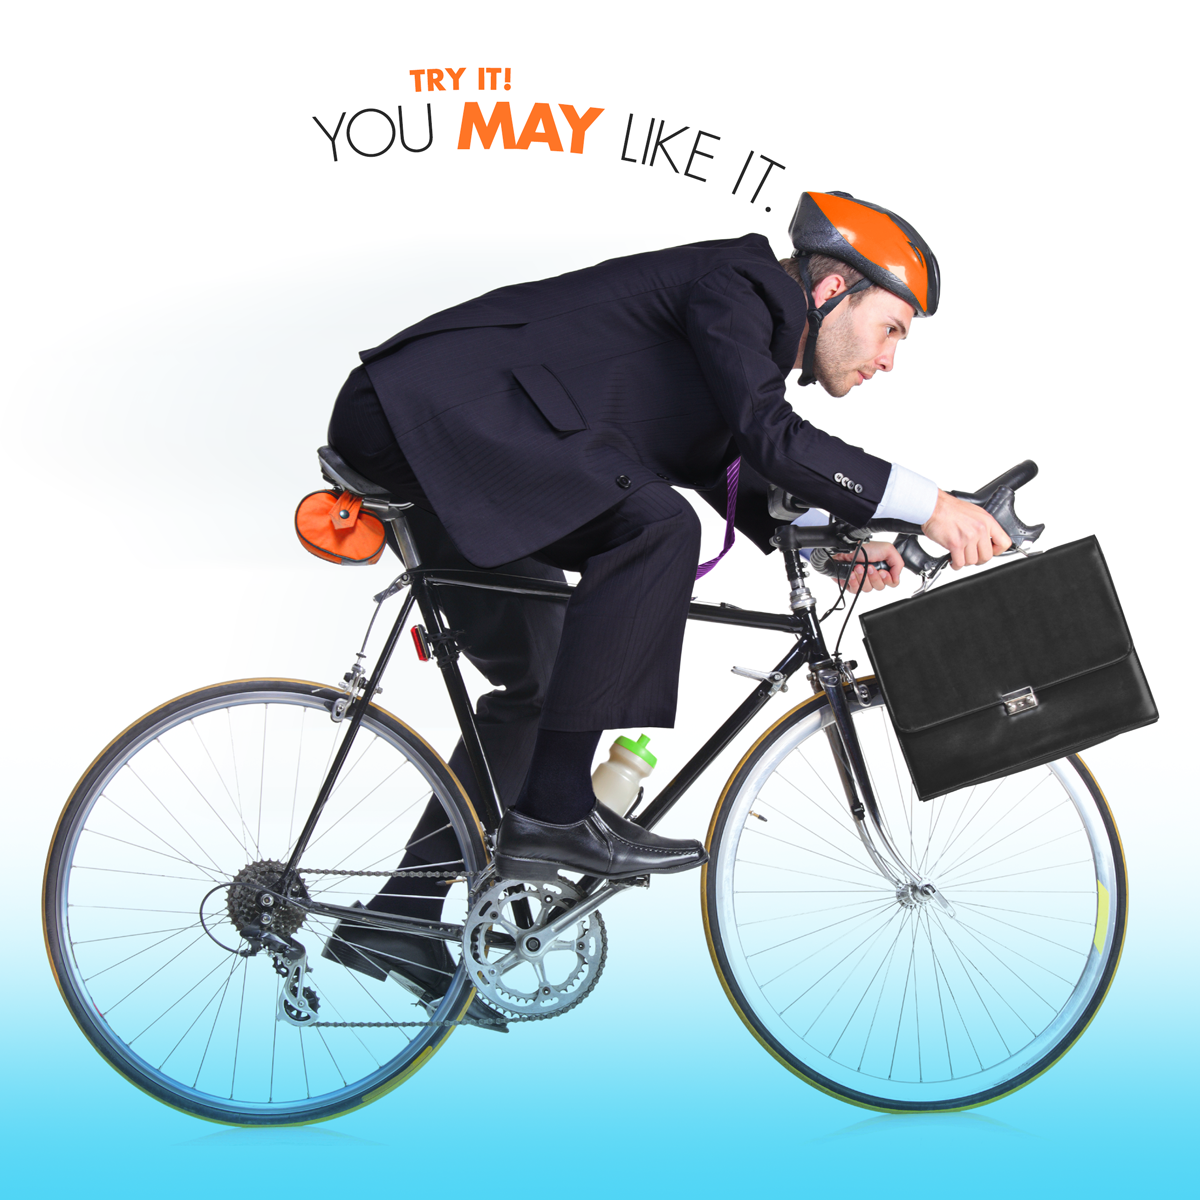 man in a suit with a briefcase riding a bike